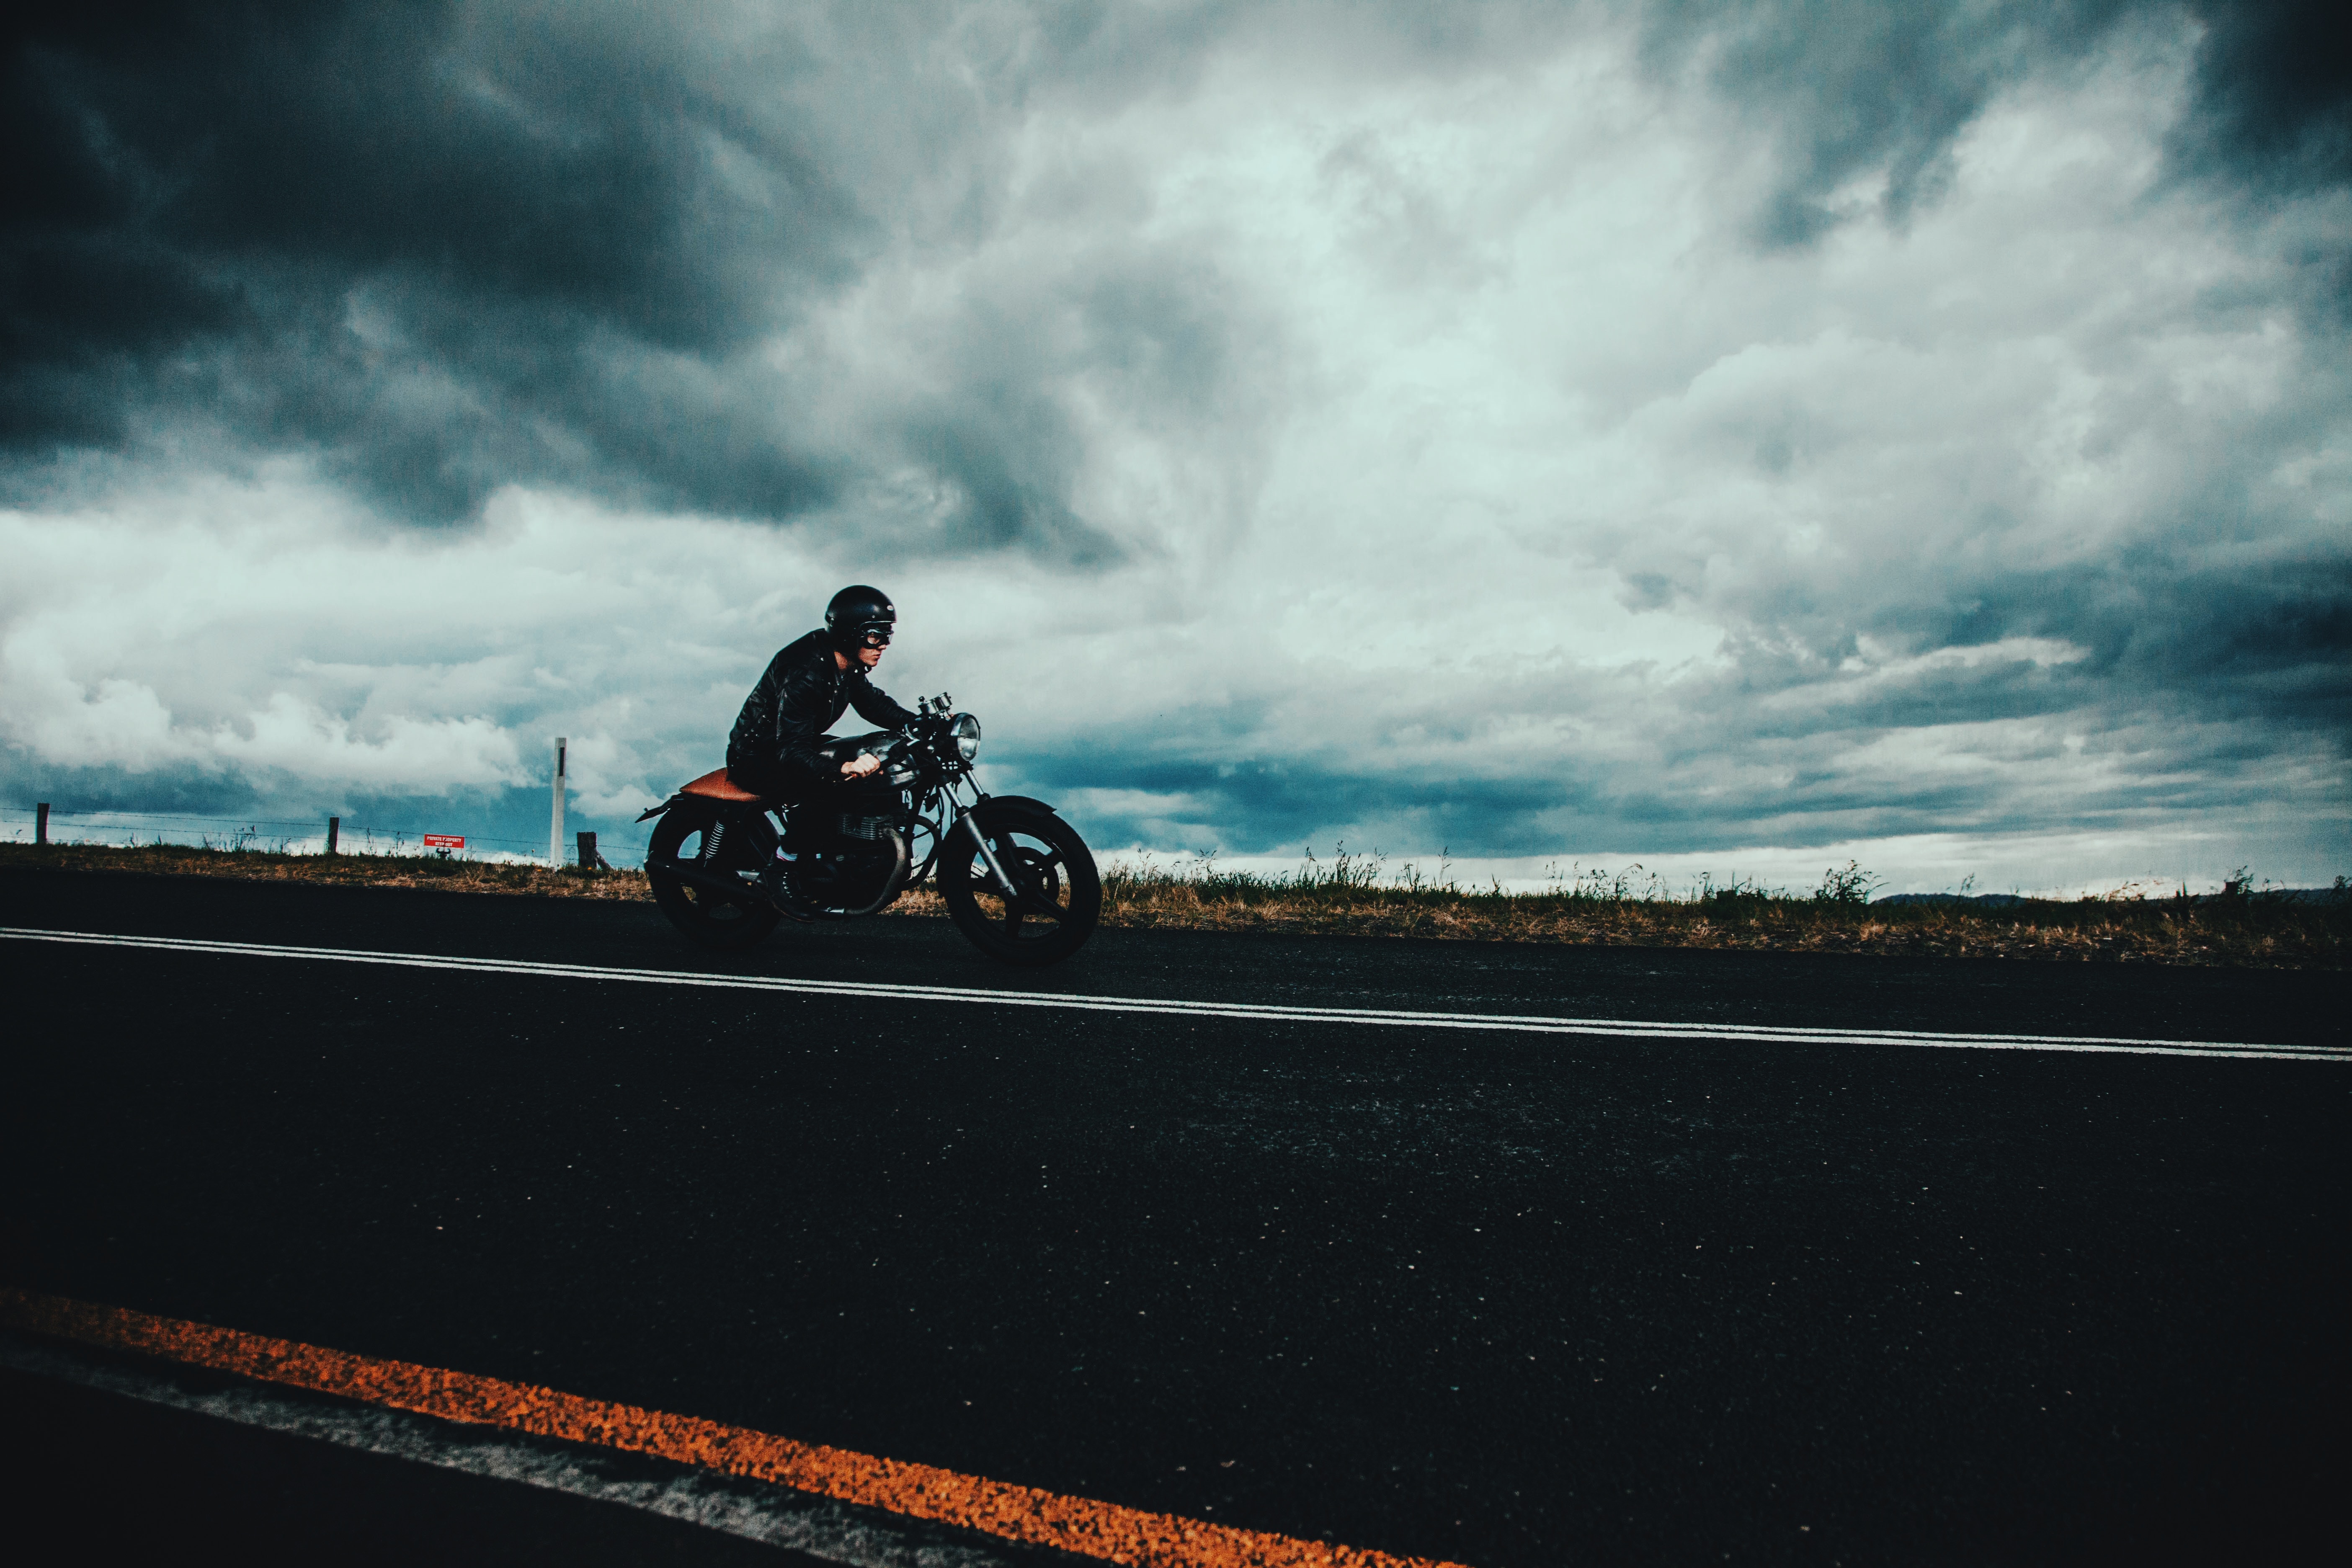 motorcyclist, clouds, motorcycles, road, markup, asphalt, helmet, mainly cloudy, overcast 4K Ultra